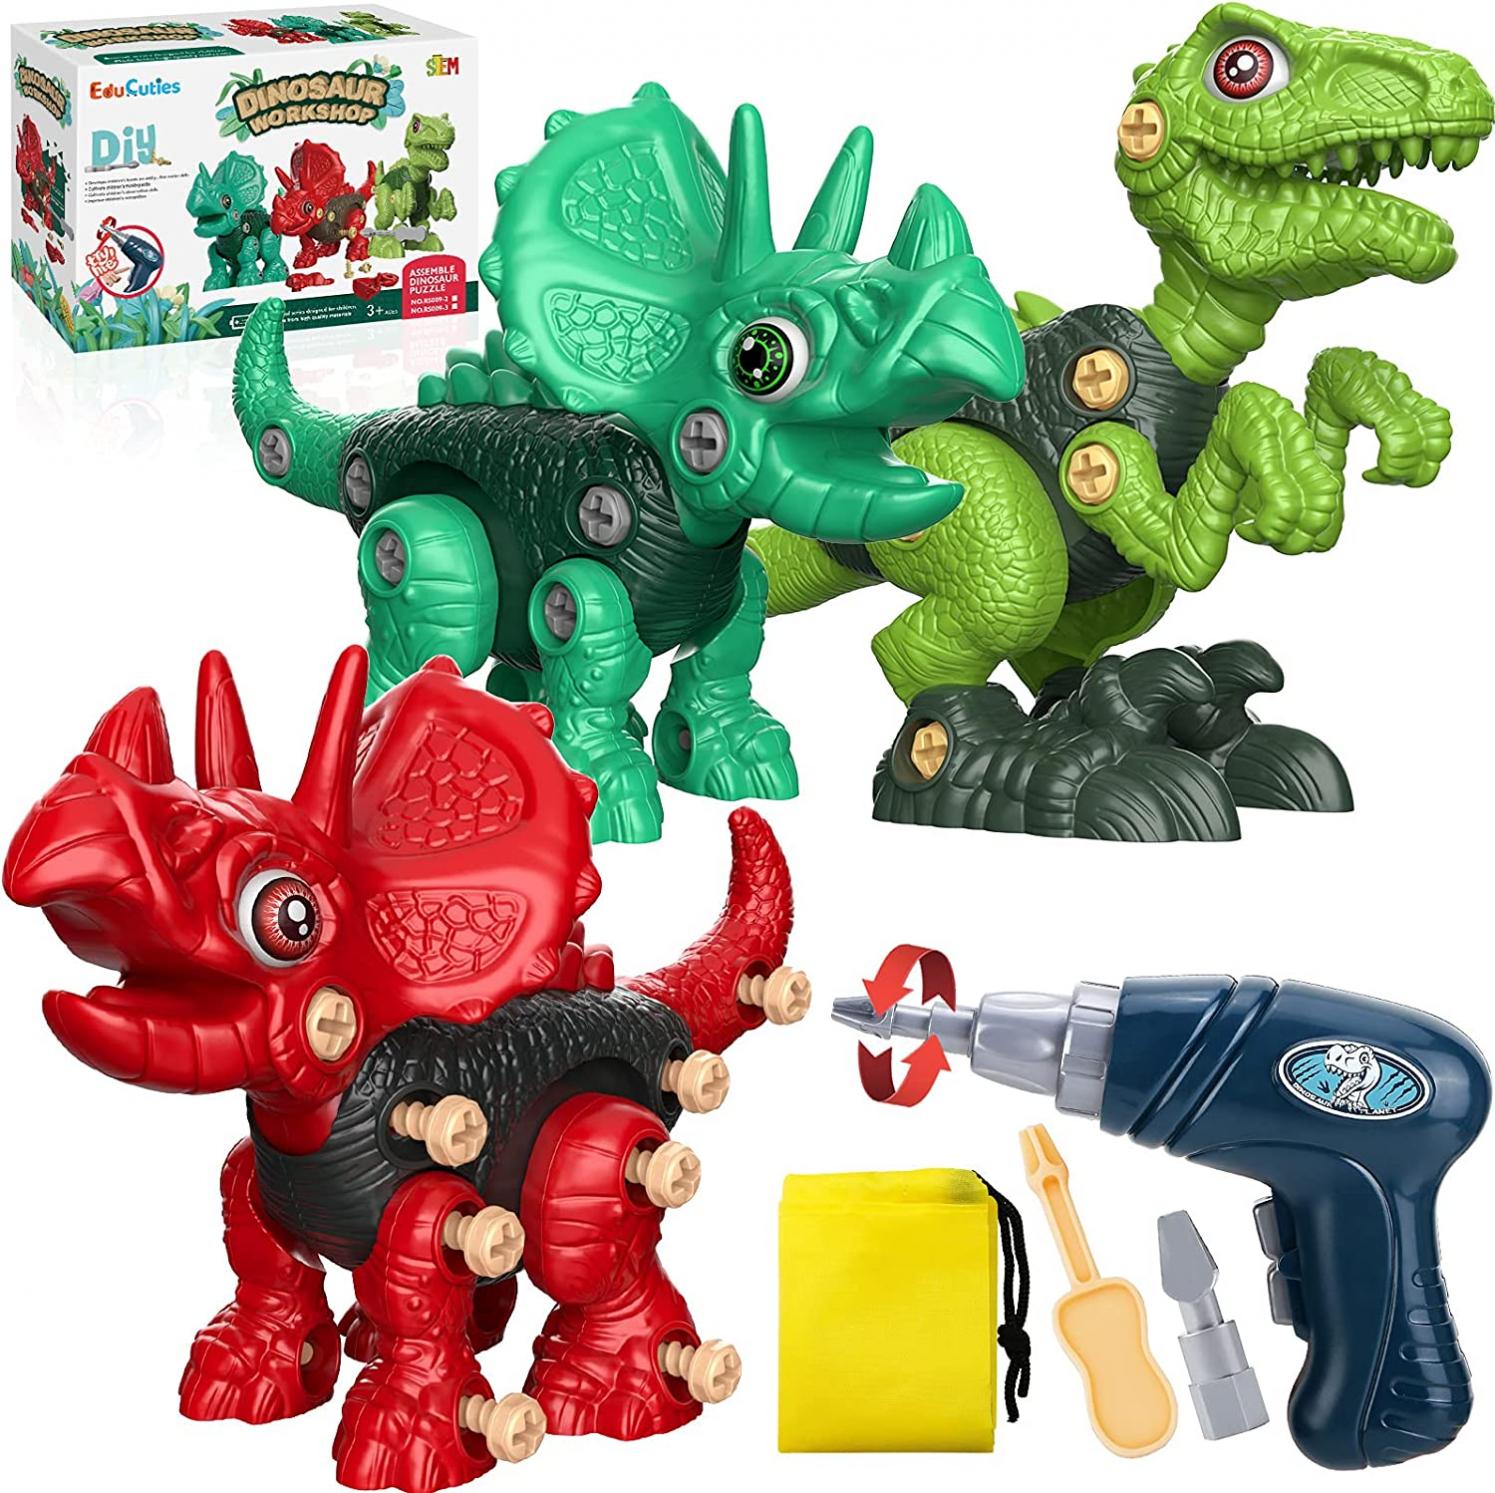 EduCuties Dinosaur Toys for Kids, 3 Pack Take Apart Toys for Boys Girls Age 3-5 4-8, Construction Building Educational STEM Sets with Electric Drill for 3 4 5 6 7 8 Year Old Birthday Gifts